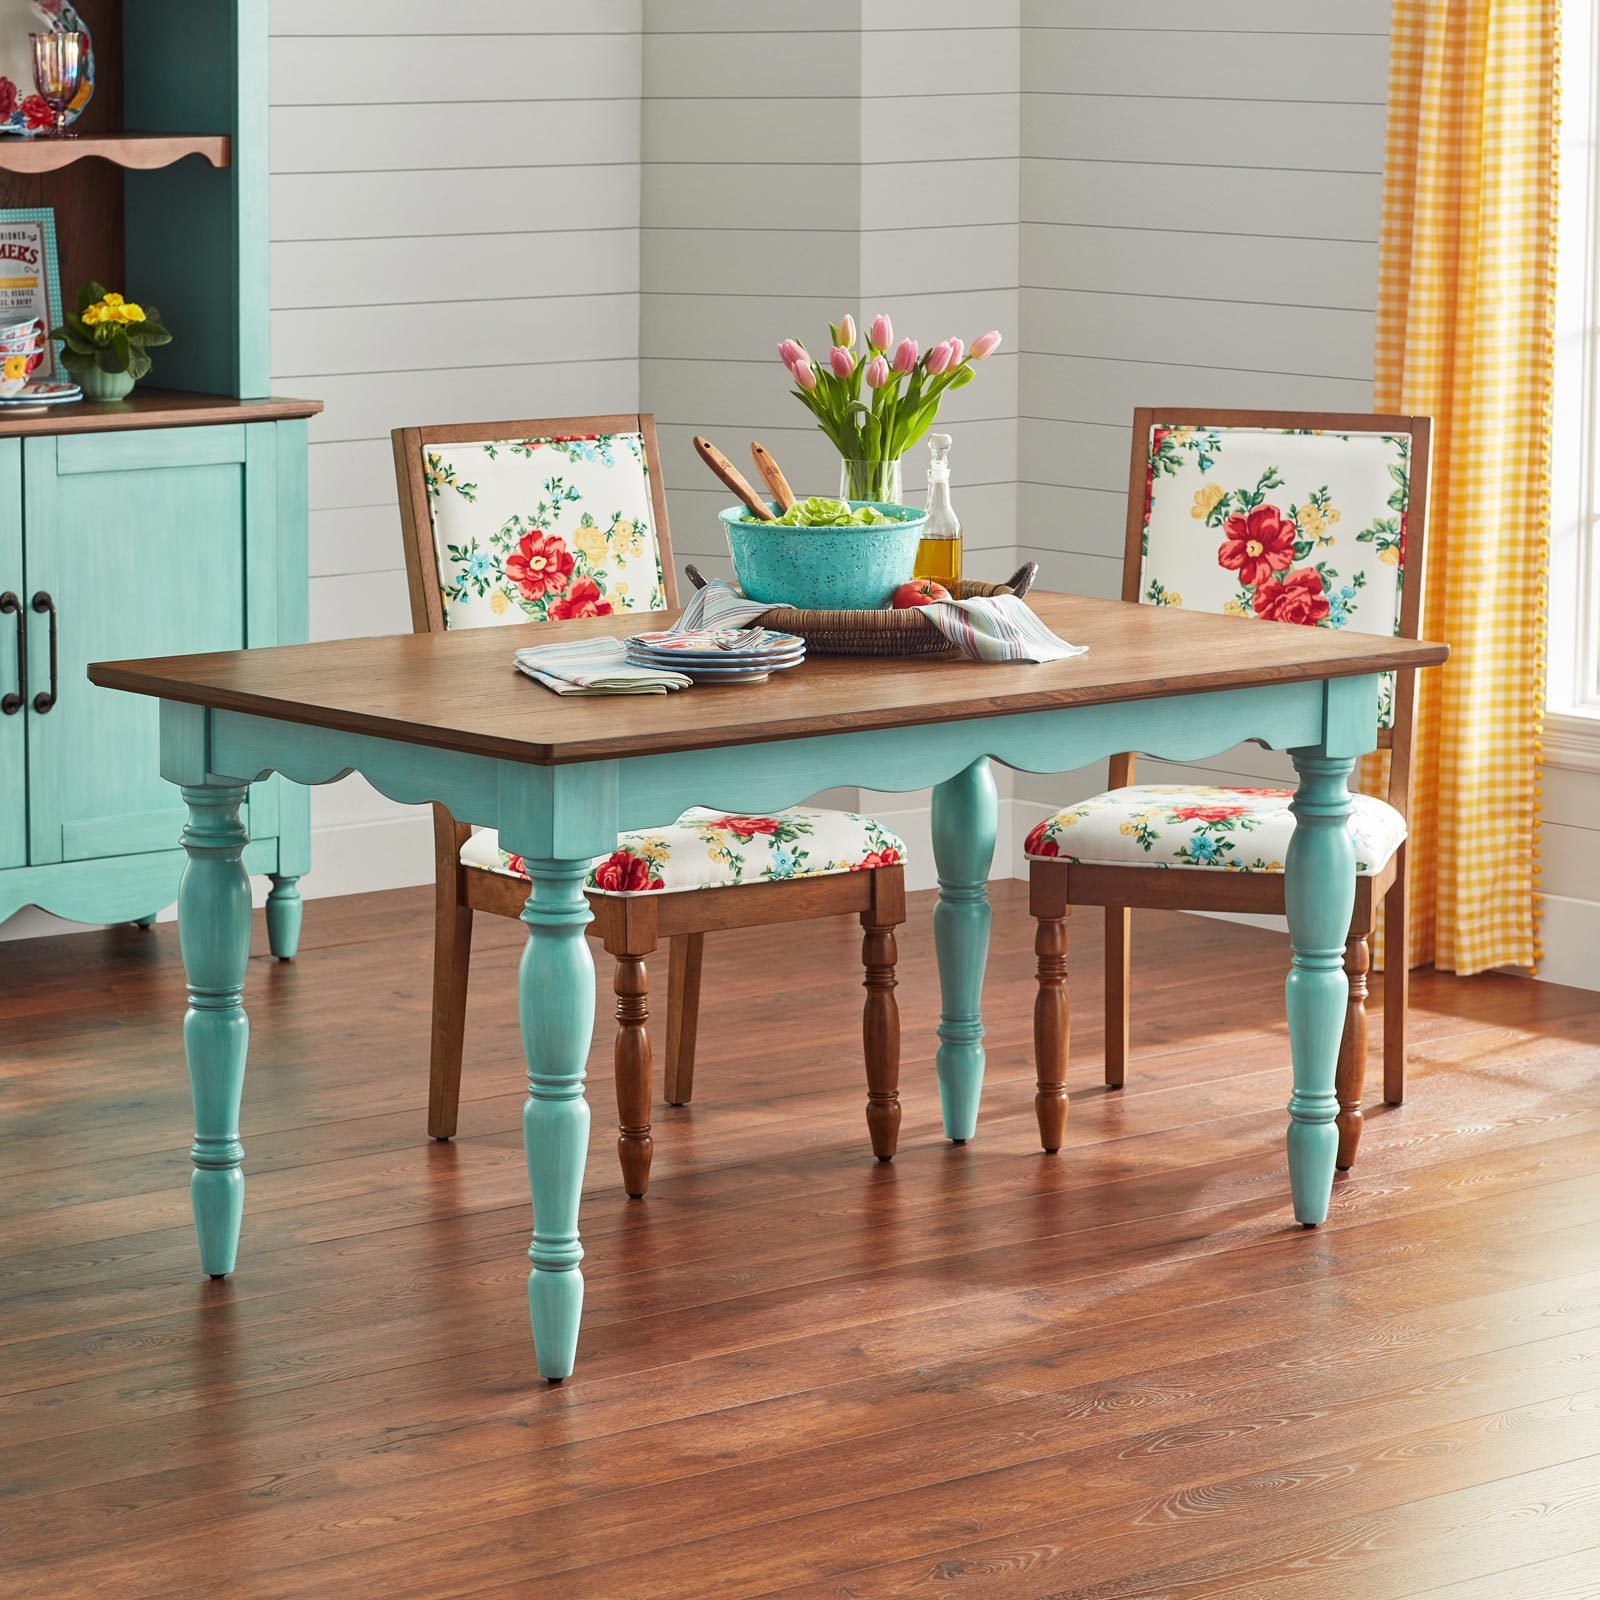 https://www.tasteofhome.com/wp-content/uploads/2023/06/TOH-ecomm-Pioneer-Woman-Furniture-kitchen-table-chairs-hutch-FT-courtesy-walmart.jpg?fit=700%2C700